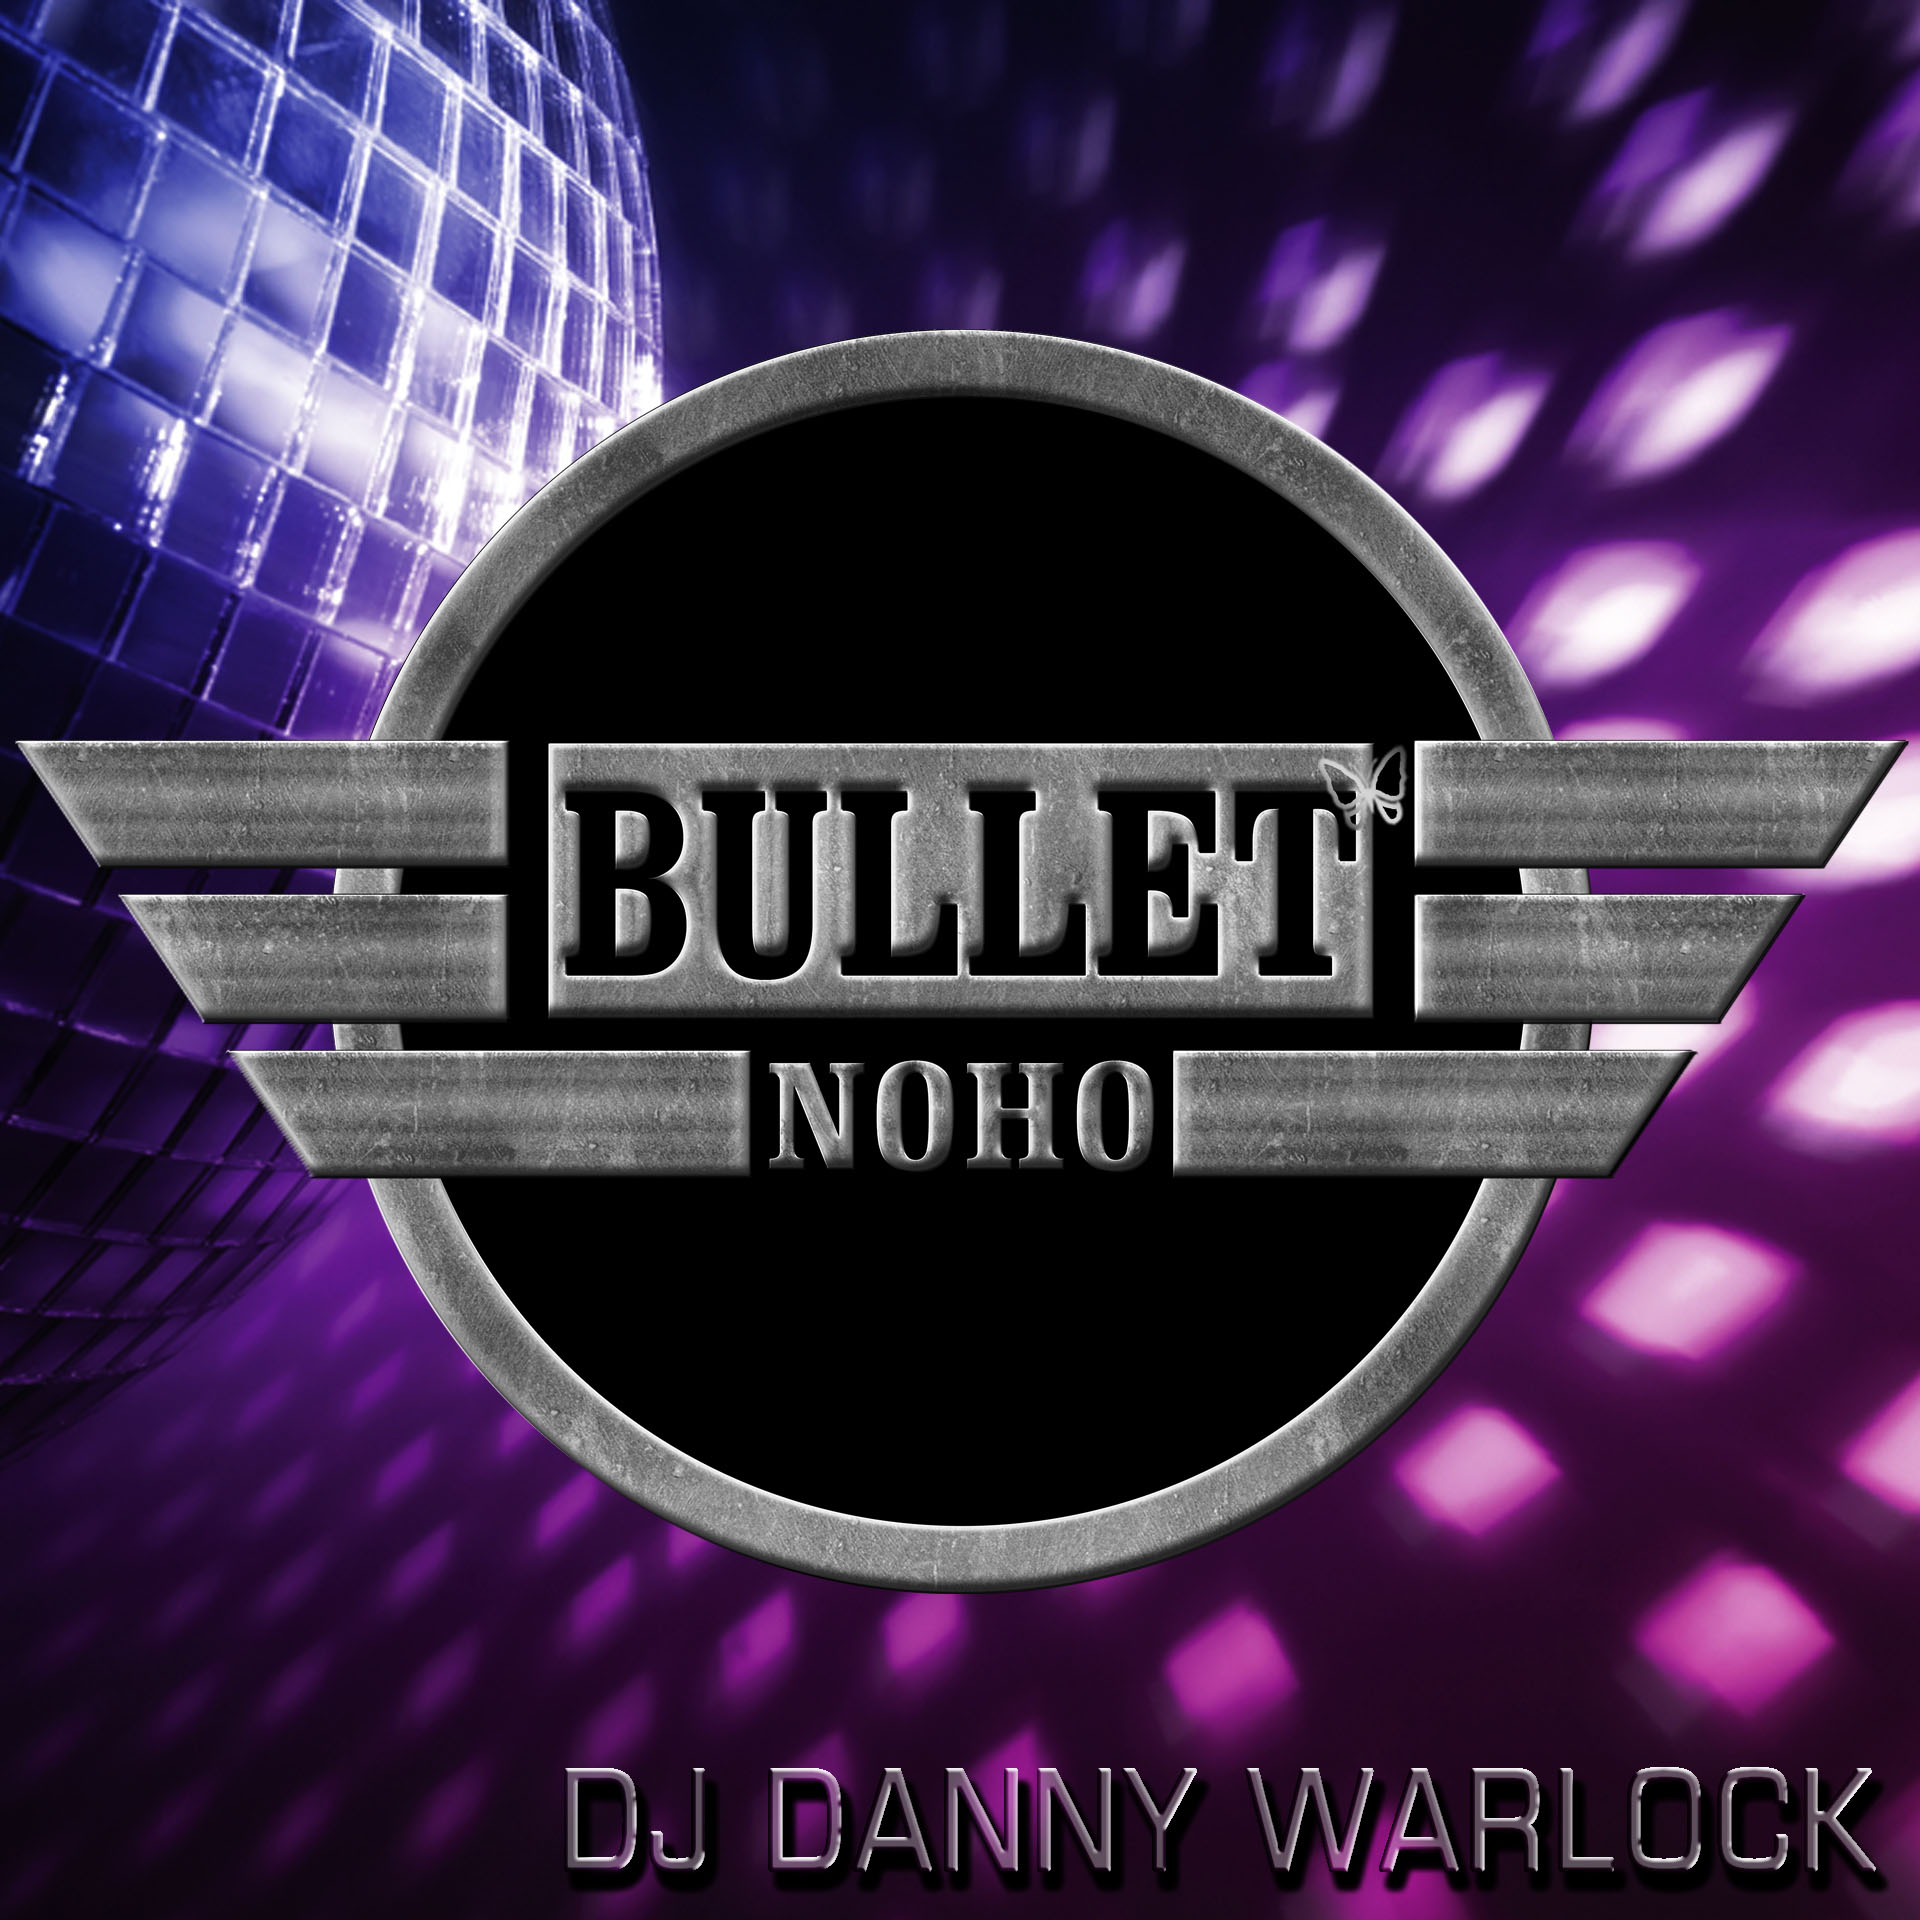 DJ DANNY WARLOCK: Friday, June 10, 2022 from 8:00 PM to 2:00 AM